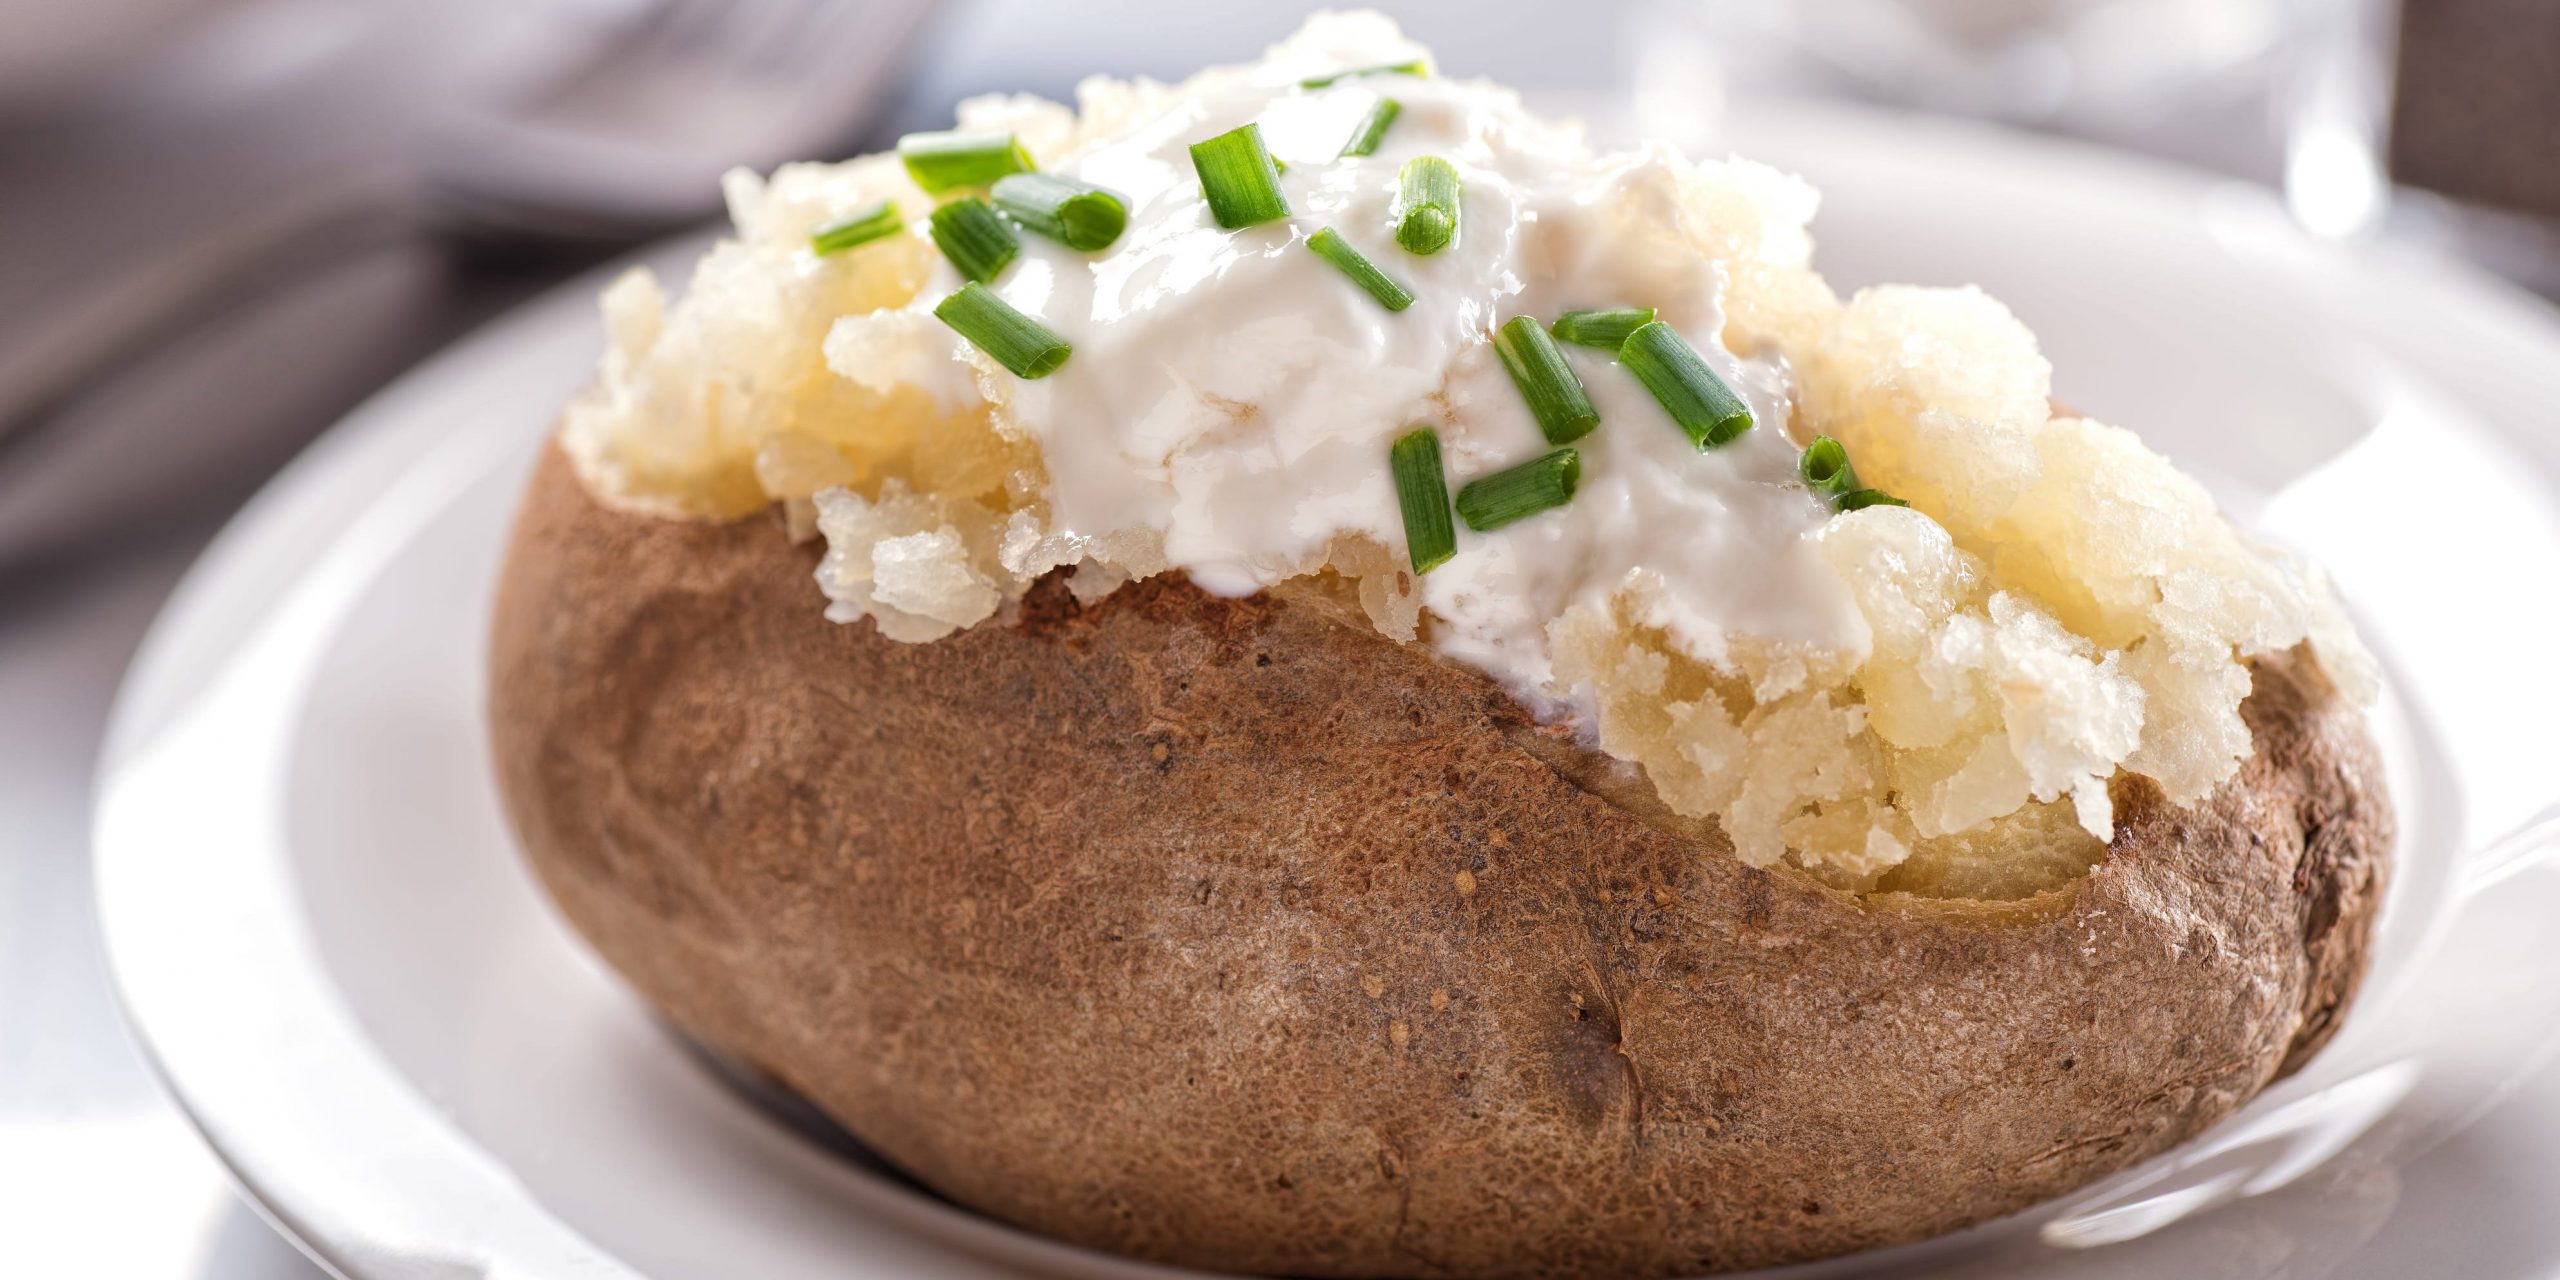 A baked potato cut open and topped with sour cream and chives